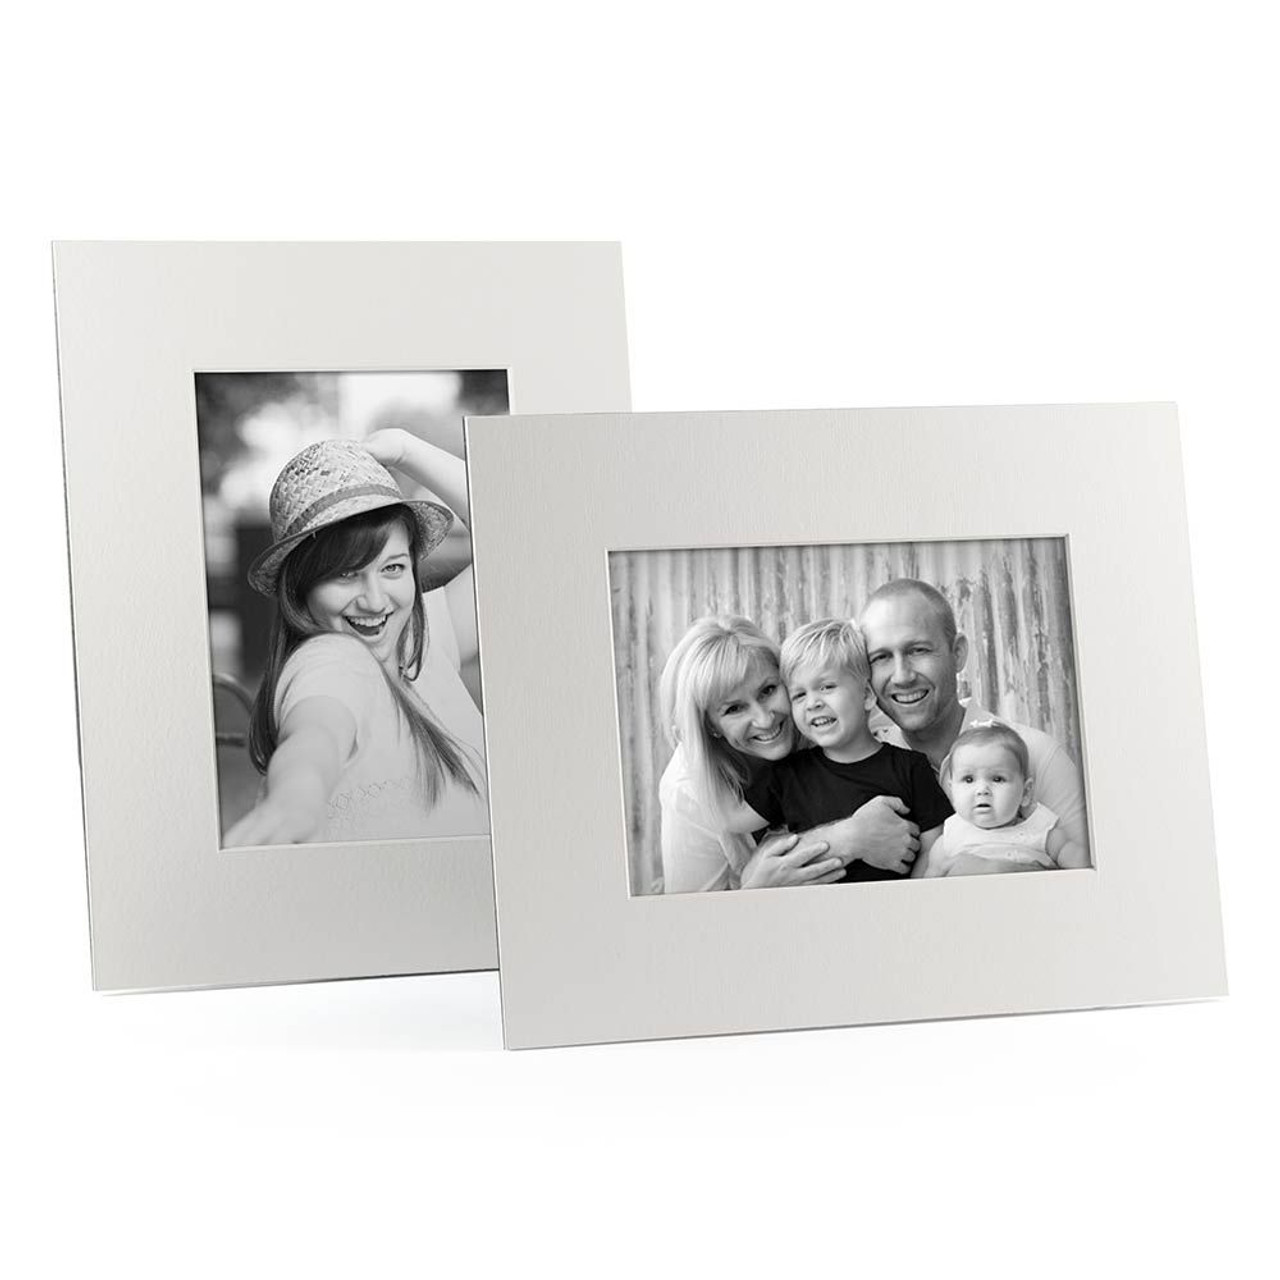 Cardboard Picture Frames for 4x6, 5x7, 8x10 Photos